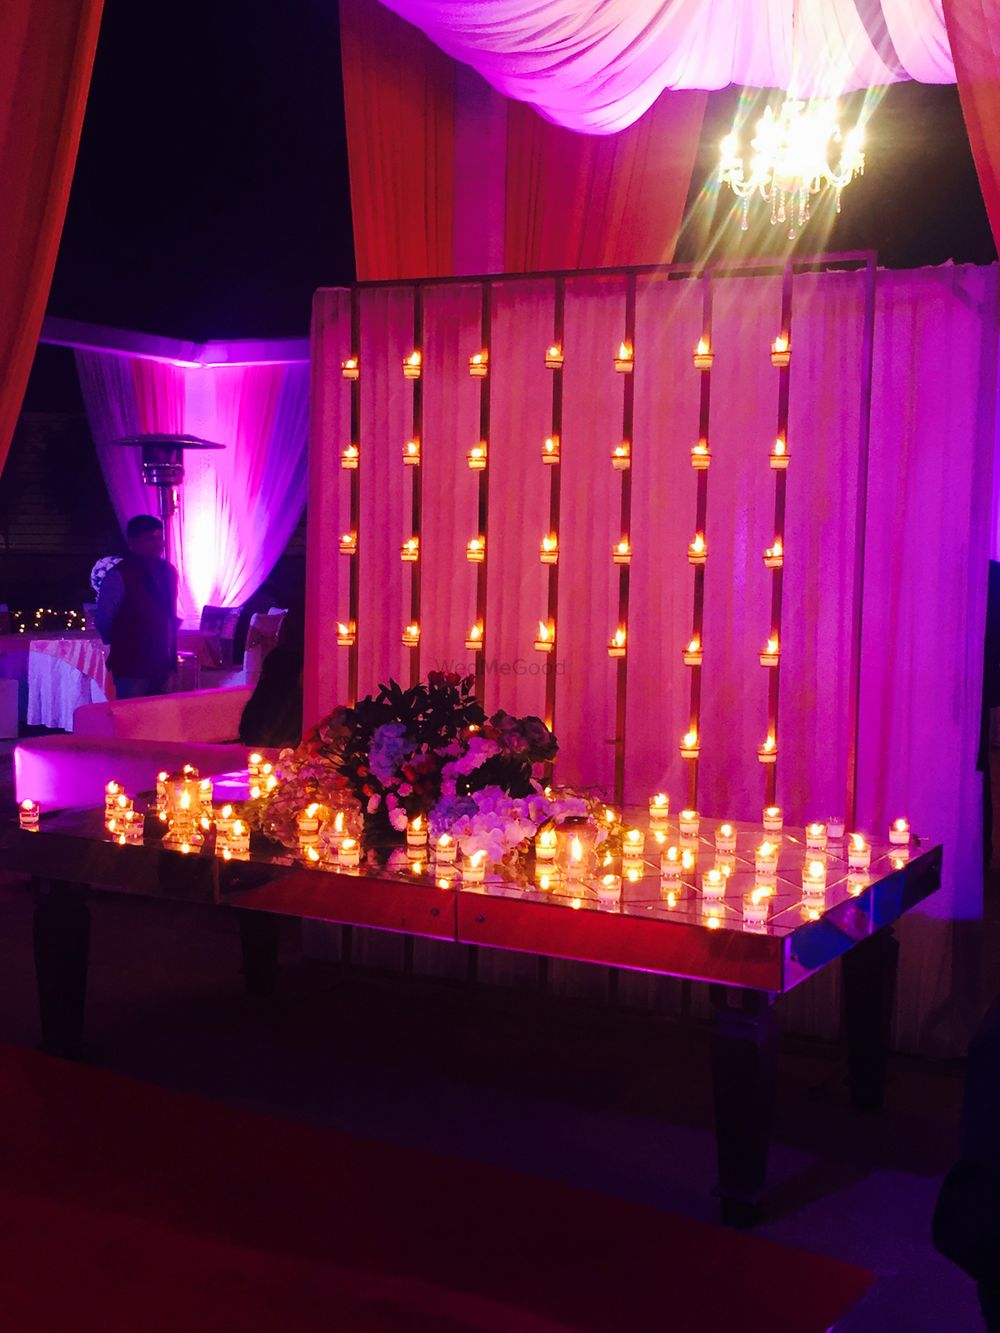 Photo From Wedding - By Eventsia Events